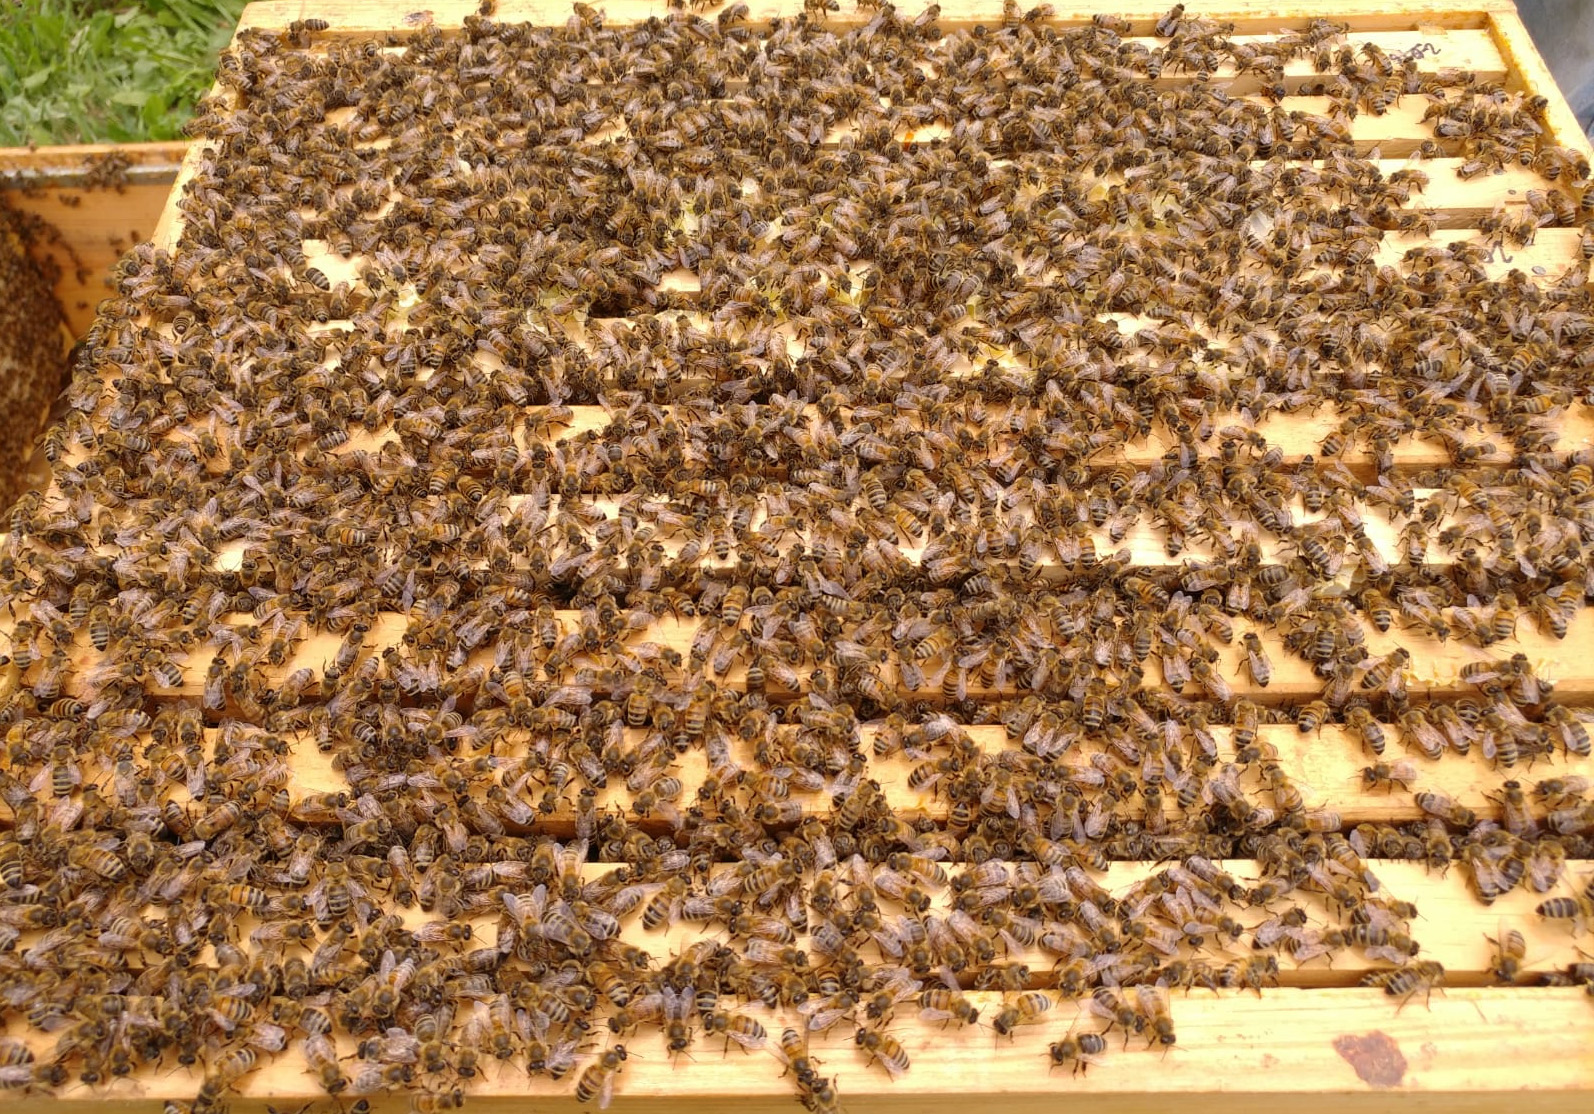 Bees on frame